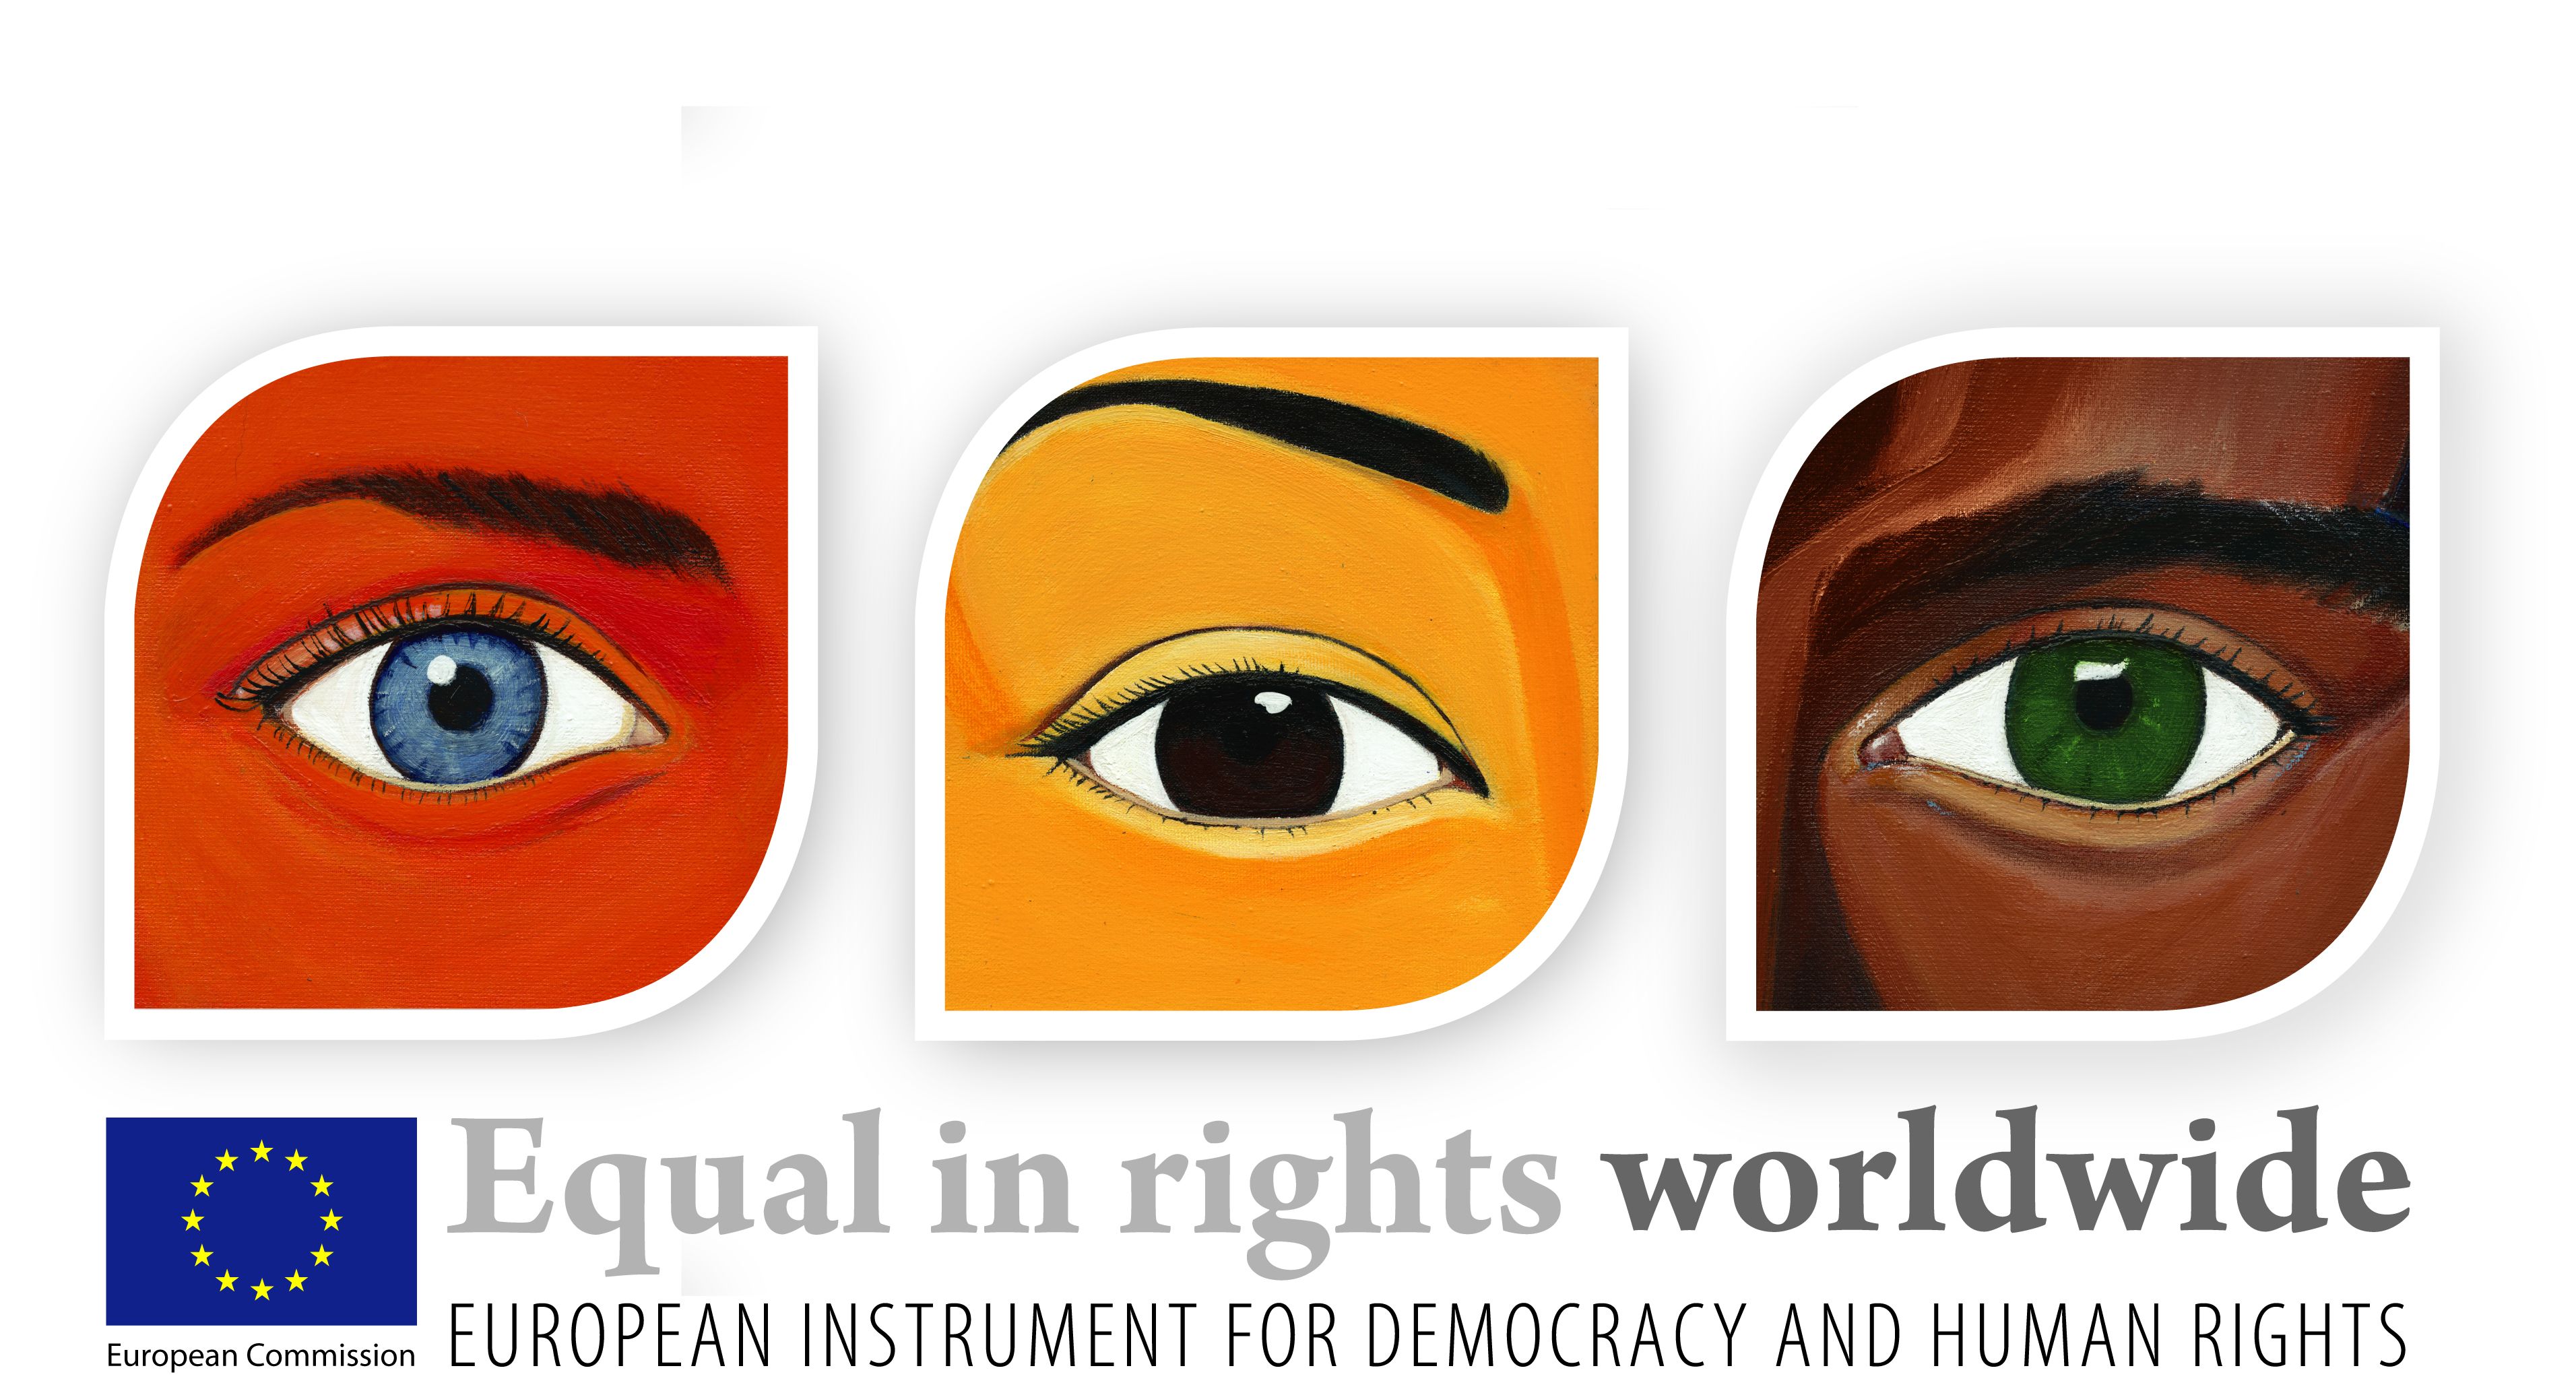 EIDHR - European Instrument for Democracy and Human Rights